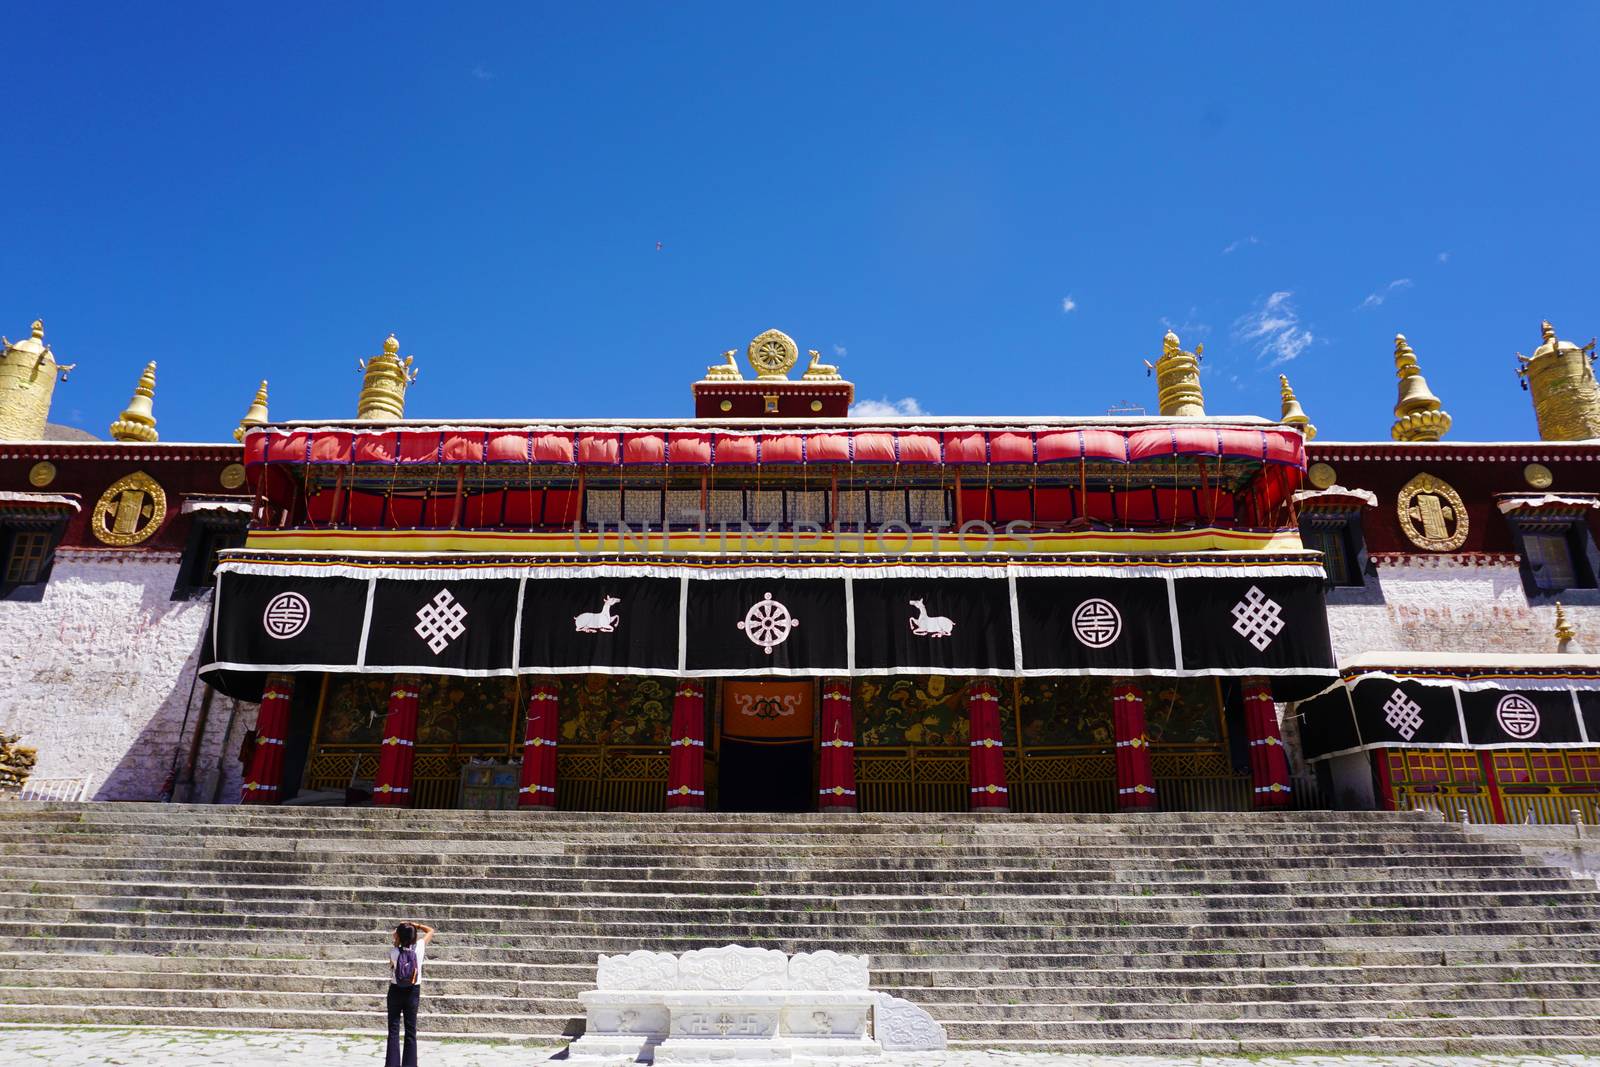 Monastery  in Lhasa, Tibet. Sacred place for Buddha pupils making piligrimage in Asia.